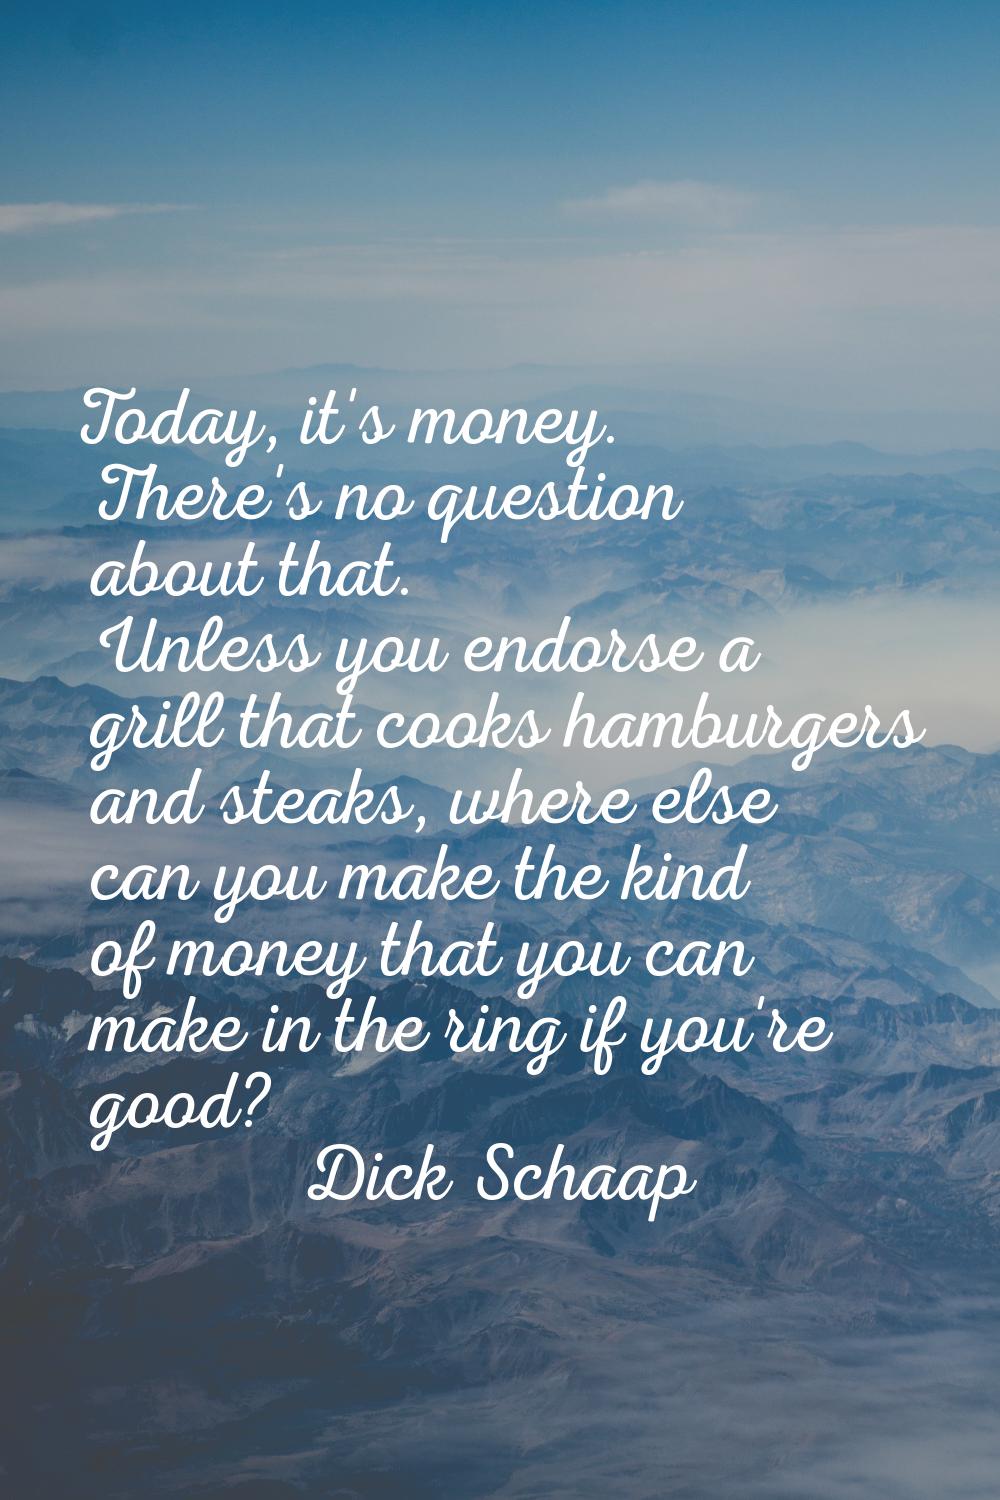 Today, it's money. There's no question about that. Unless you endorse a grill that cooks hamburgers